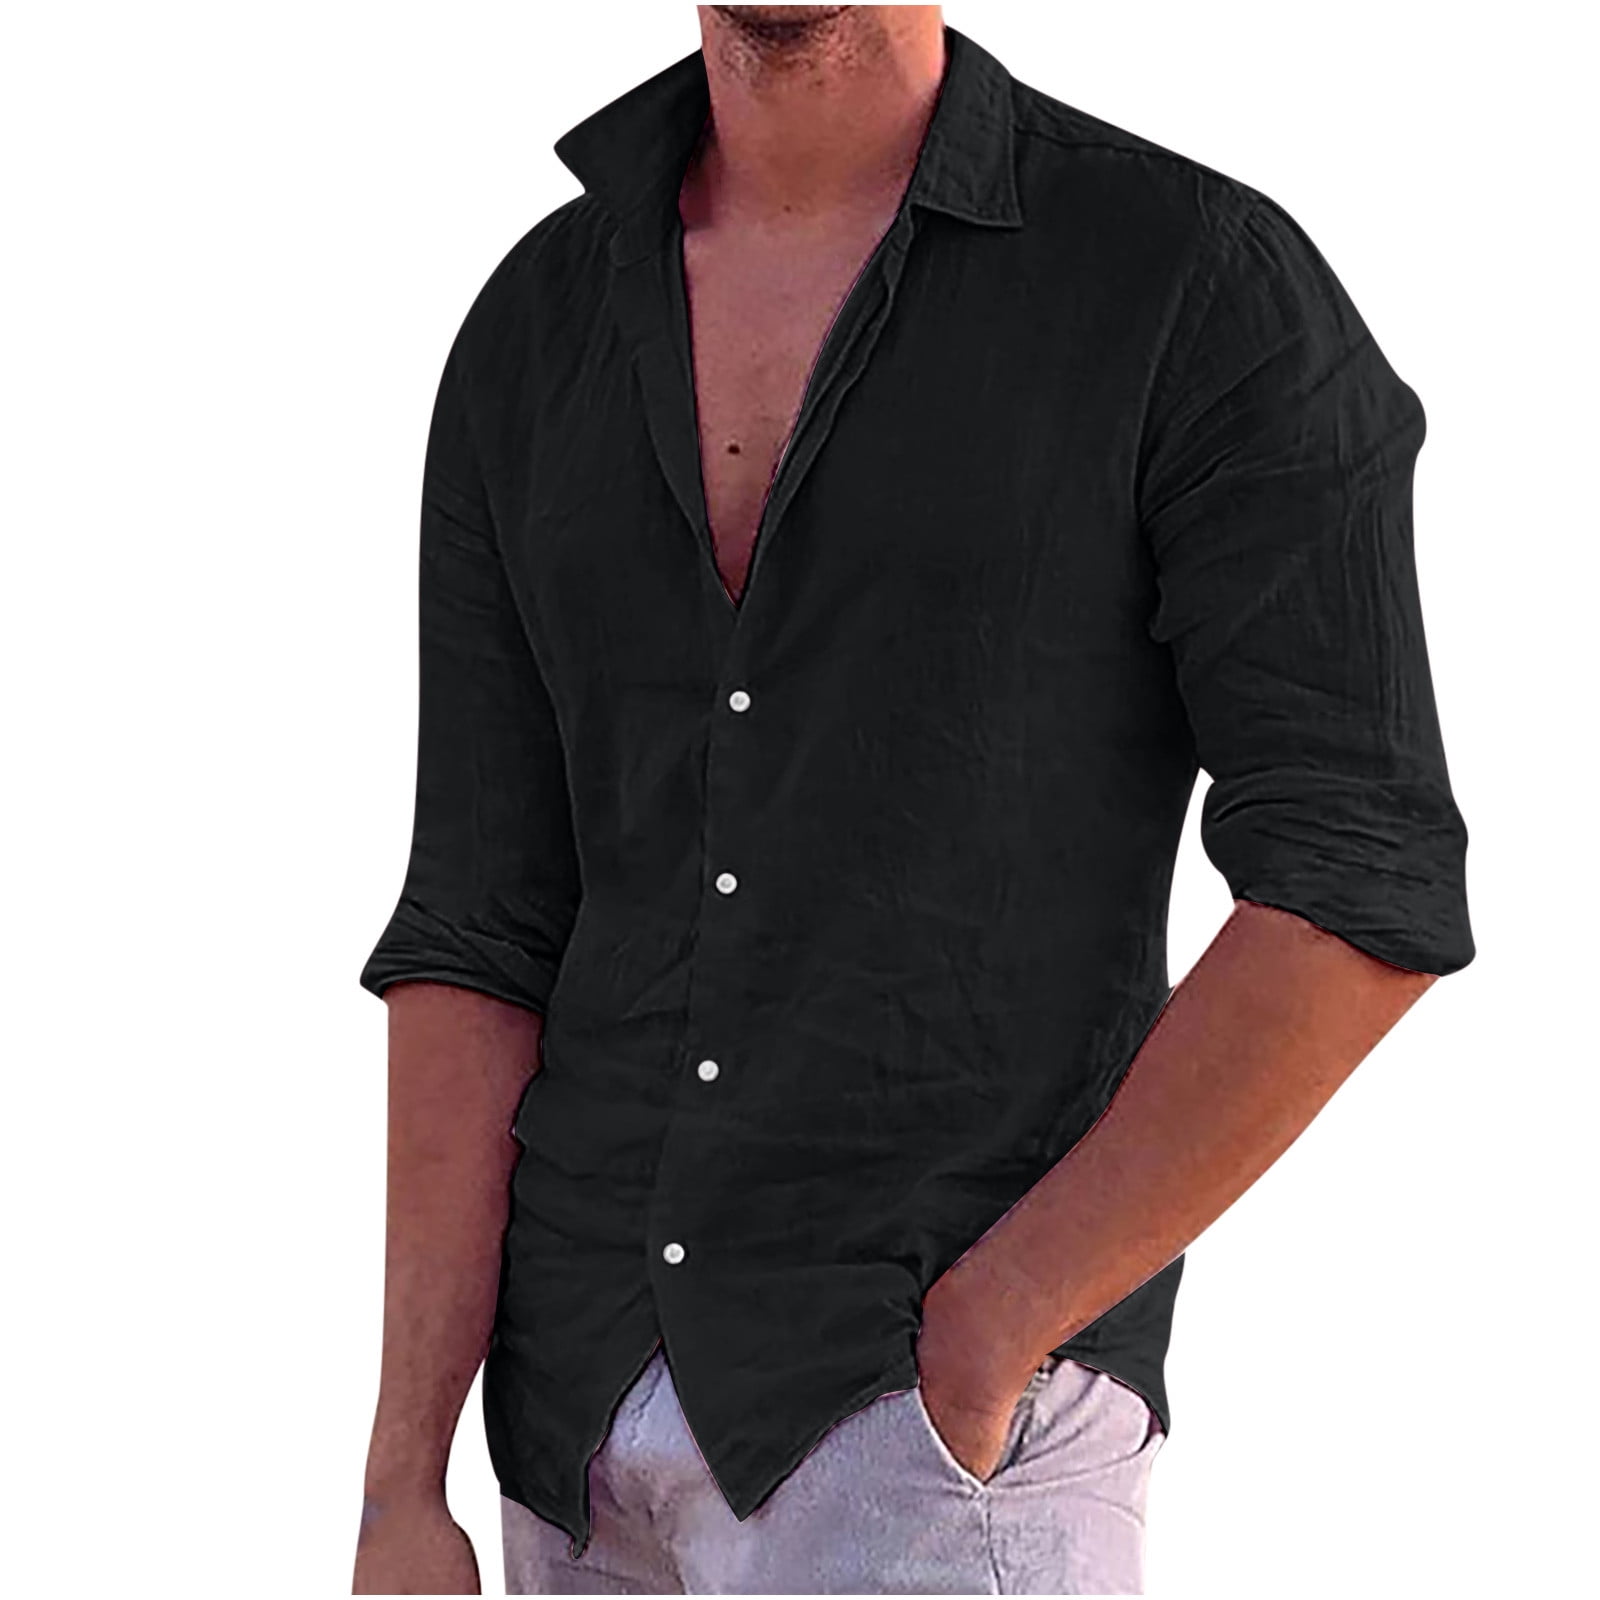 DDAPJ pyju Plus Size Cotton Linen Shirts for Men on Clearance,Casual ...